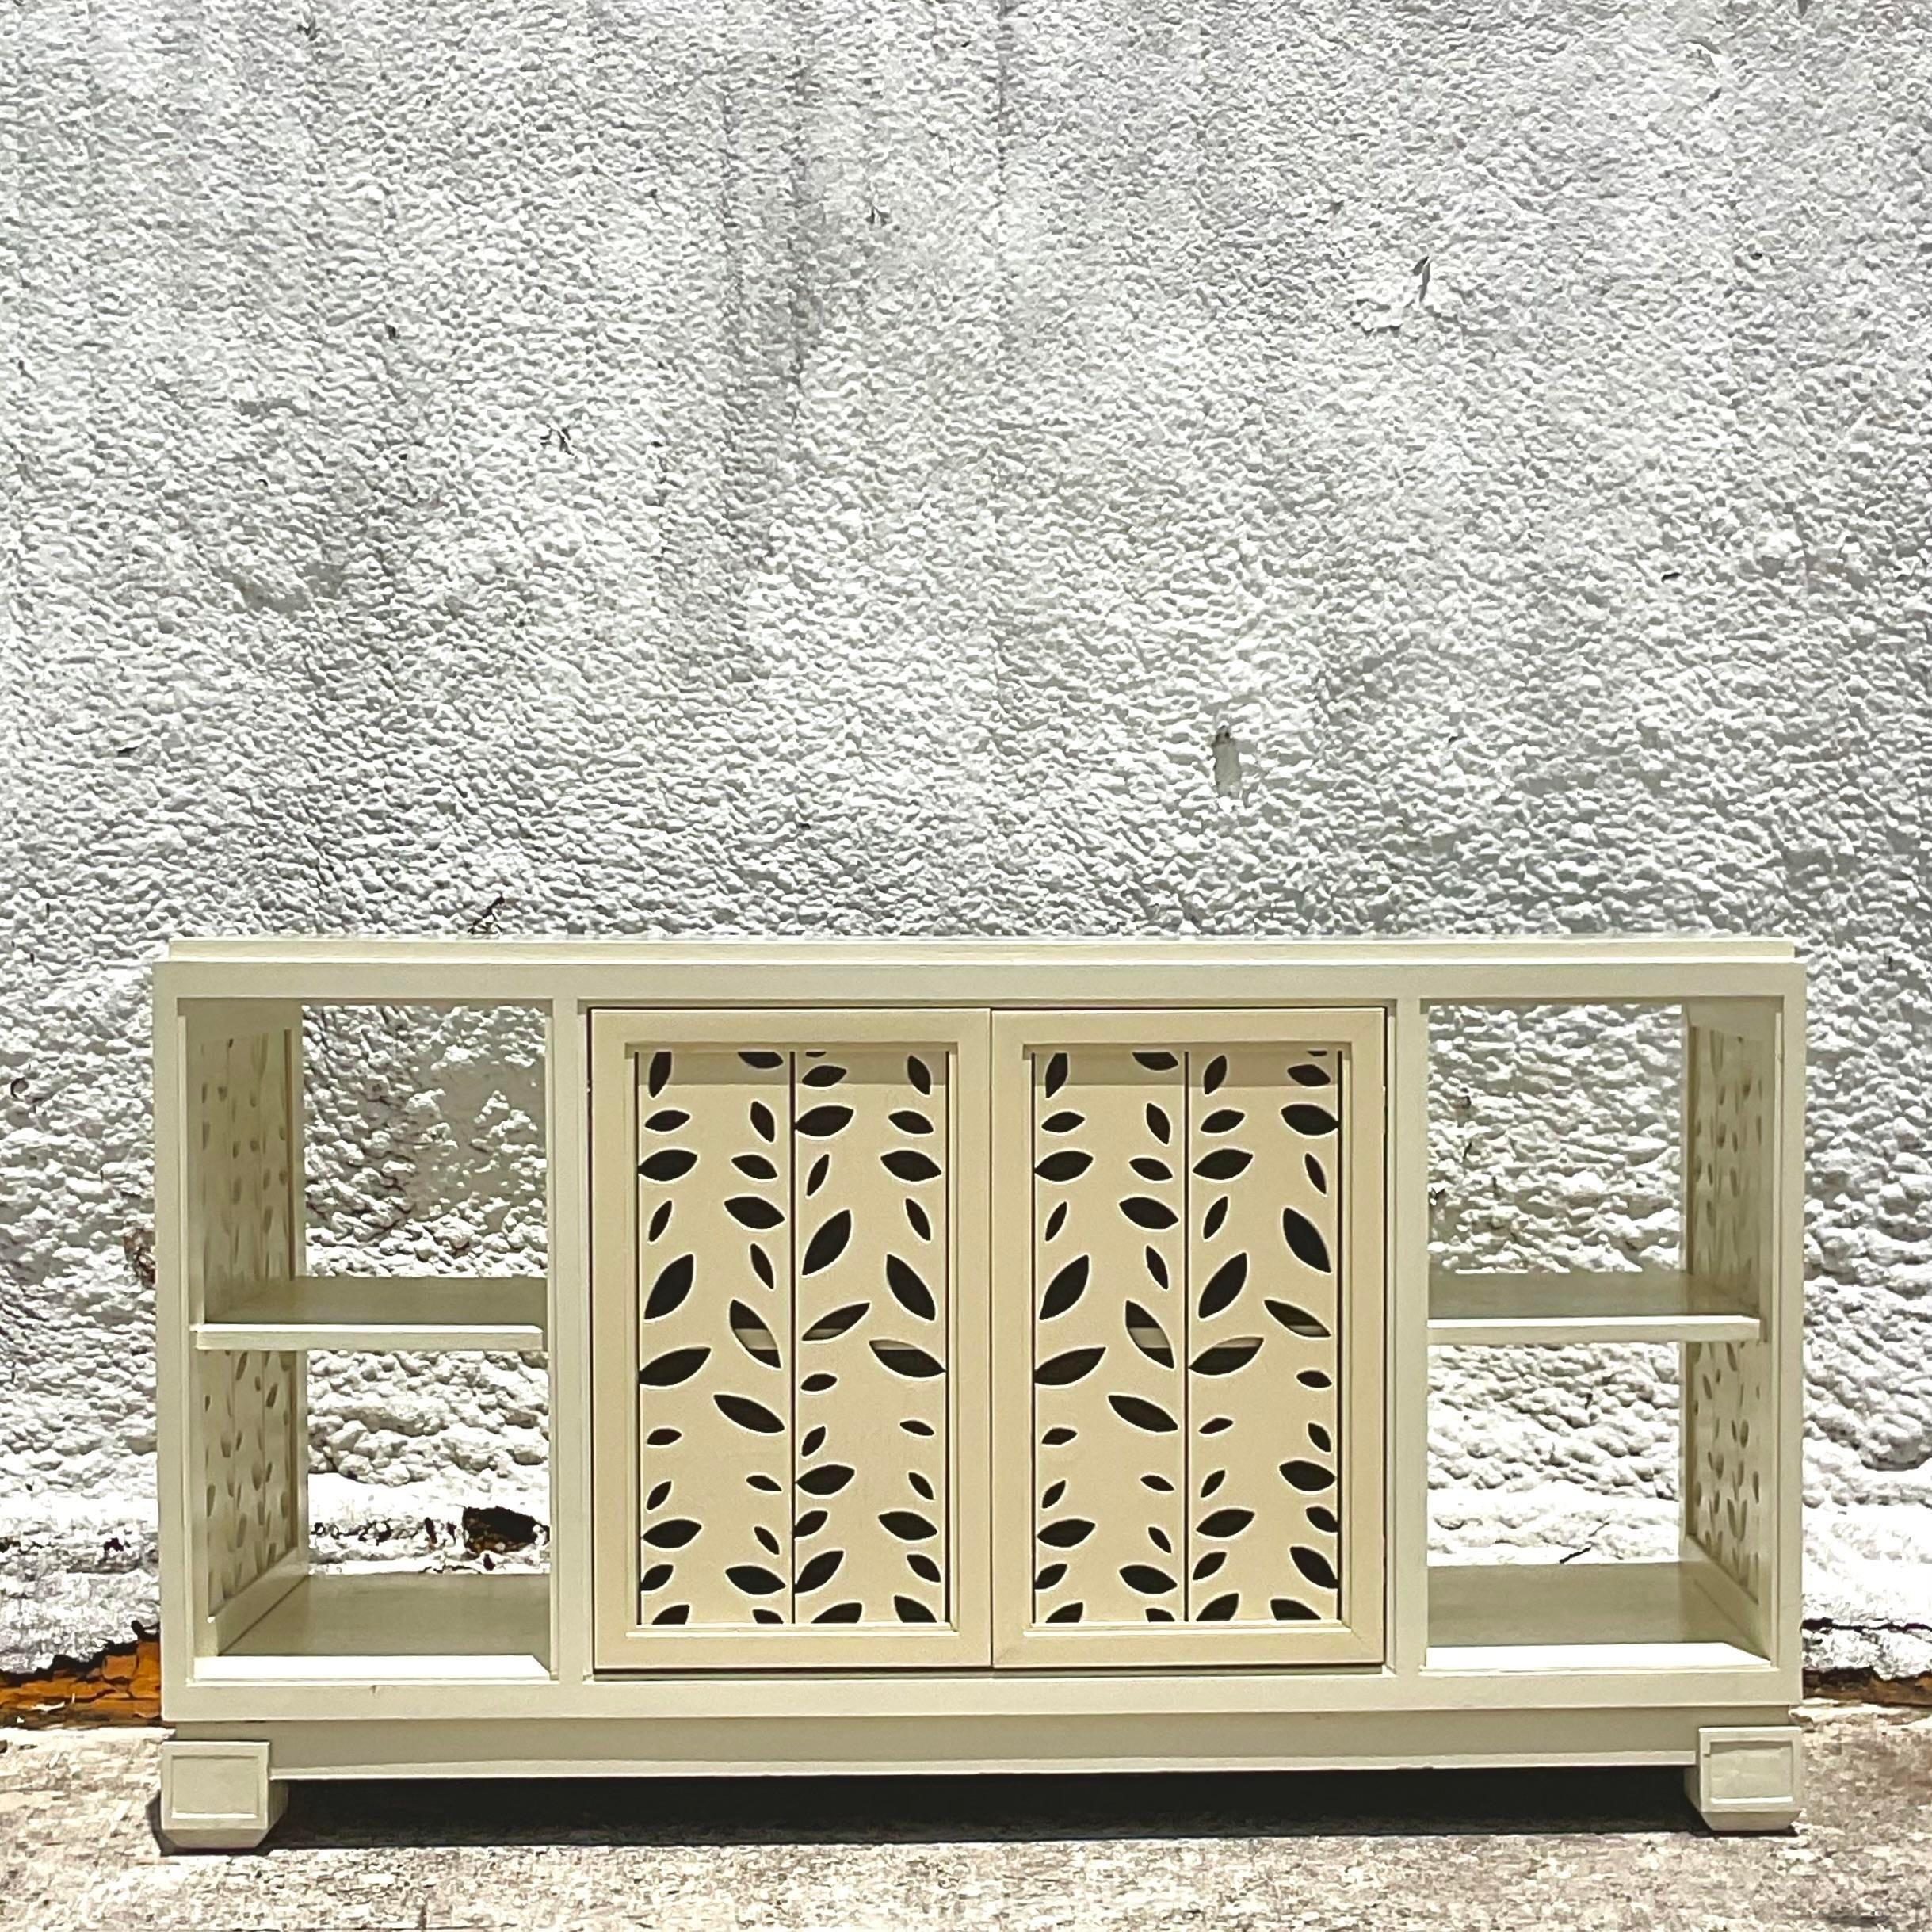 A fabulous vintage Coastal credenza. Chic punch cut doors and sides with a leaf motif. Acquired from a Palm Beach estate.